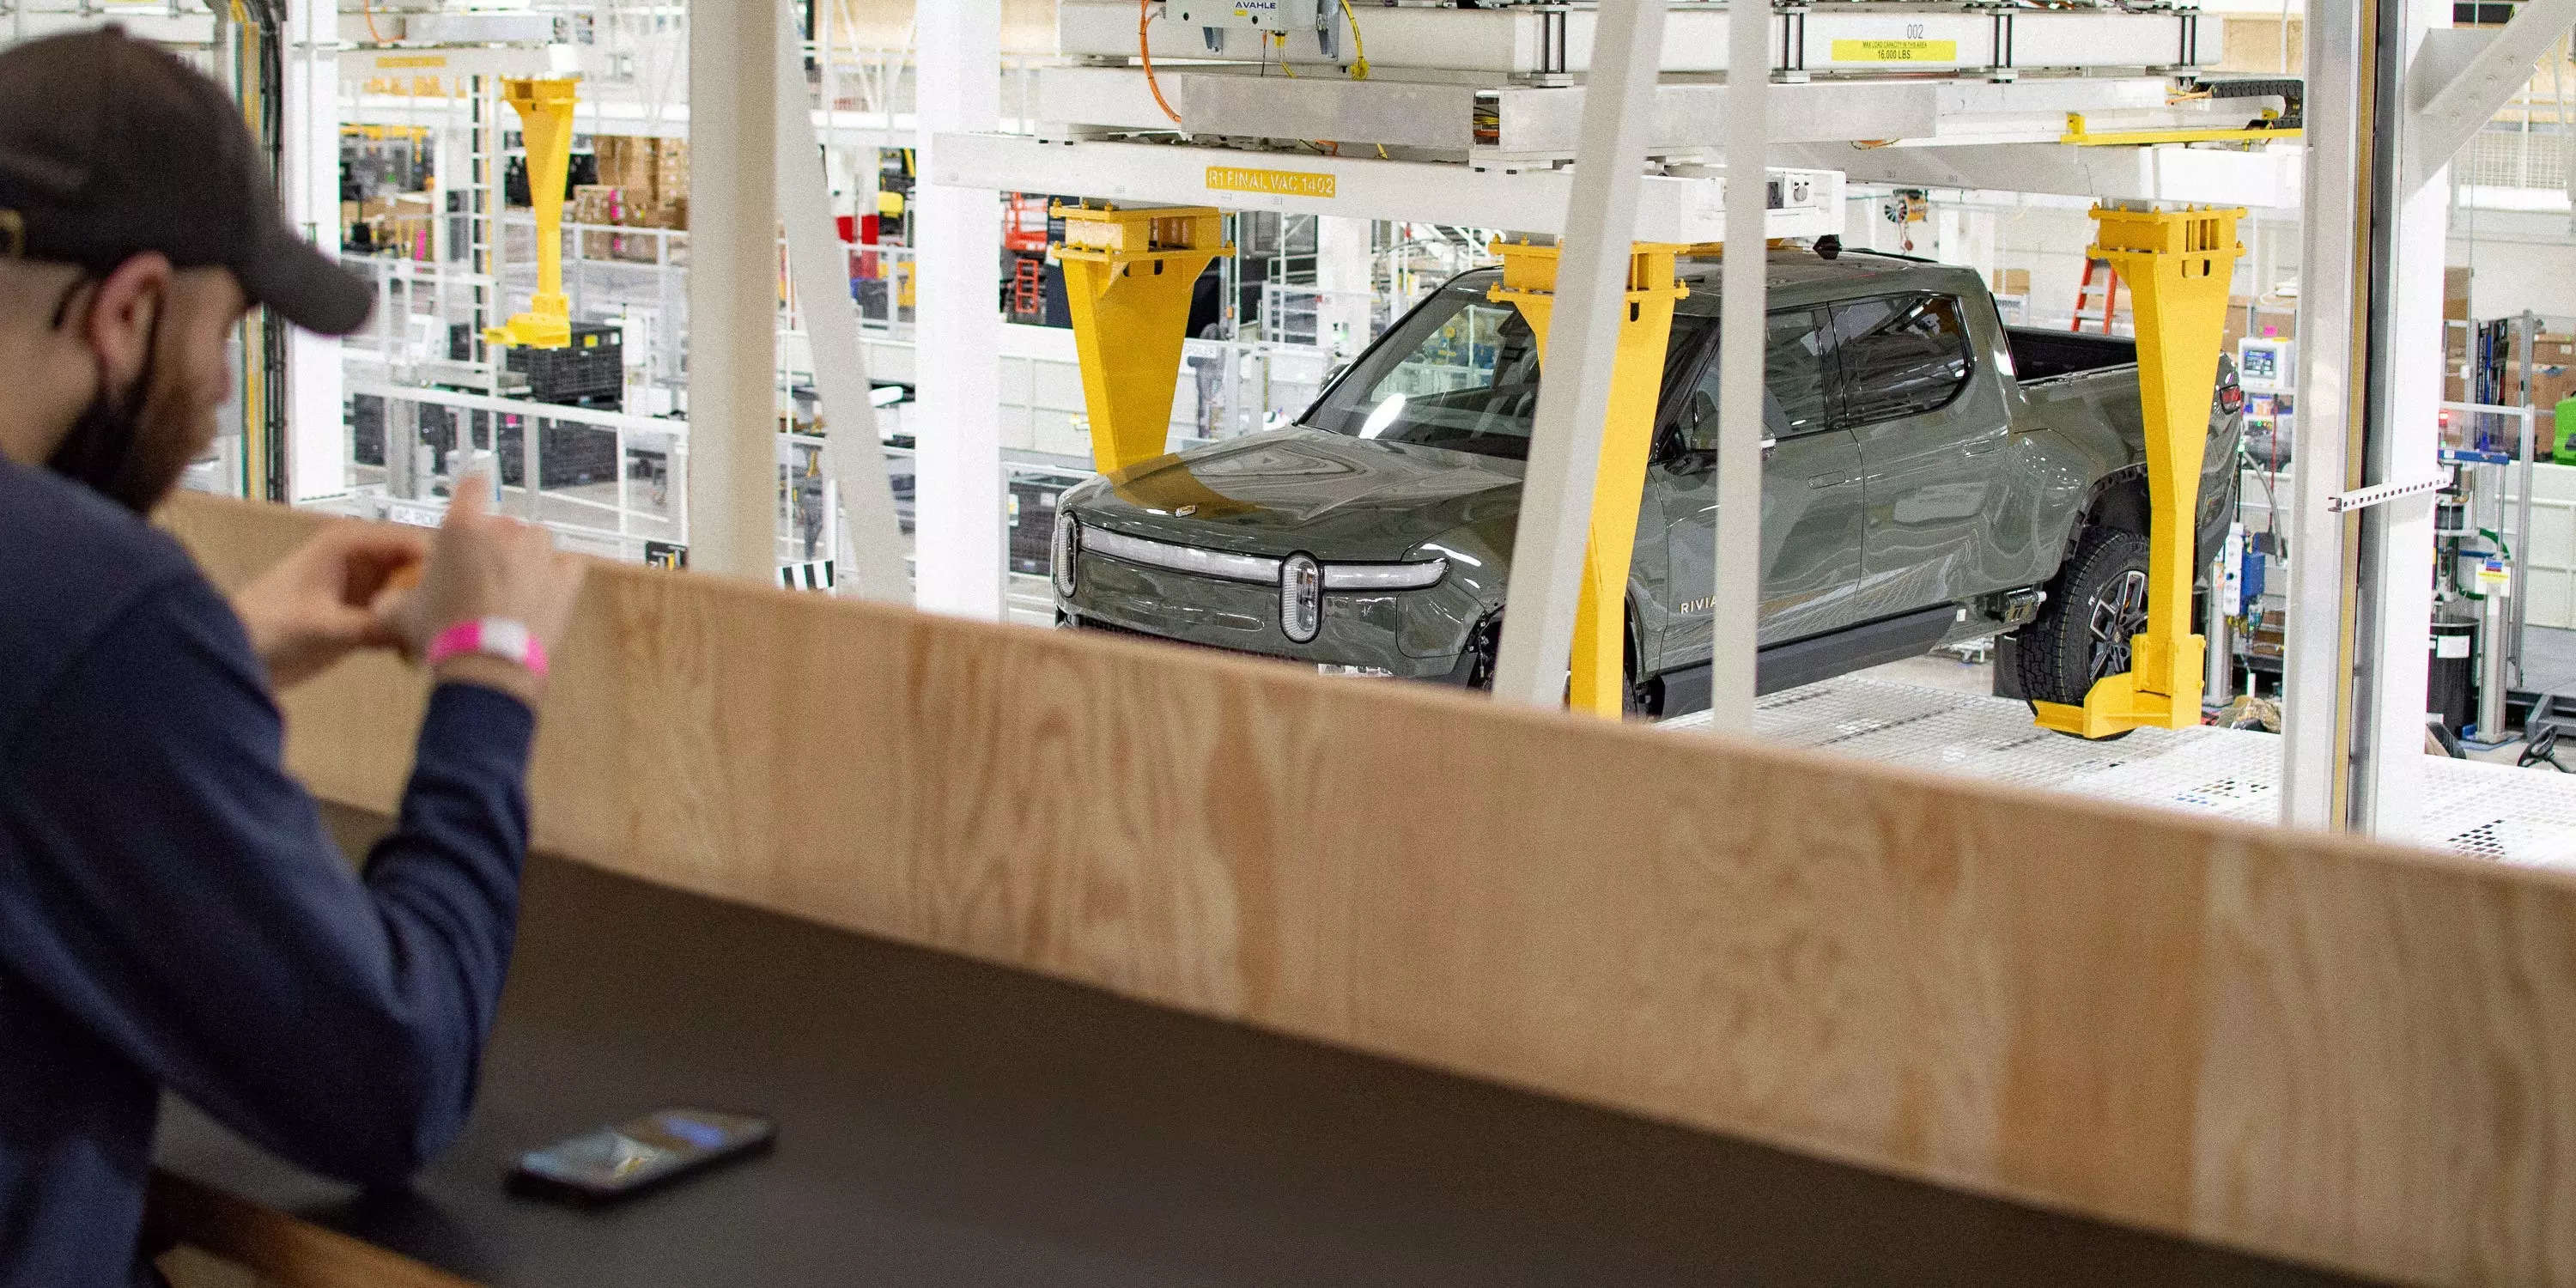 Rivian jumped after the electric car maker said Q3 deliveries rose 47% and it’s on track to produce 25,000 cars in 2022